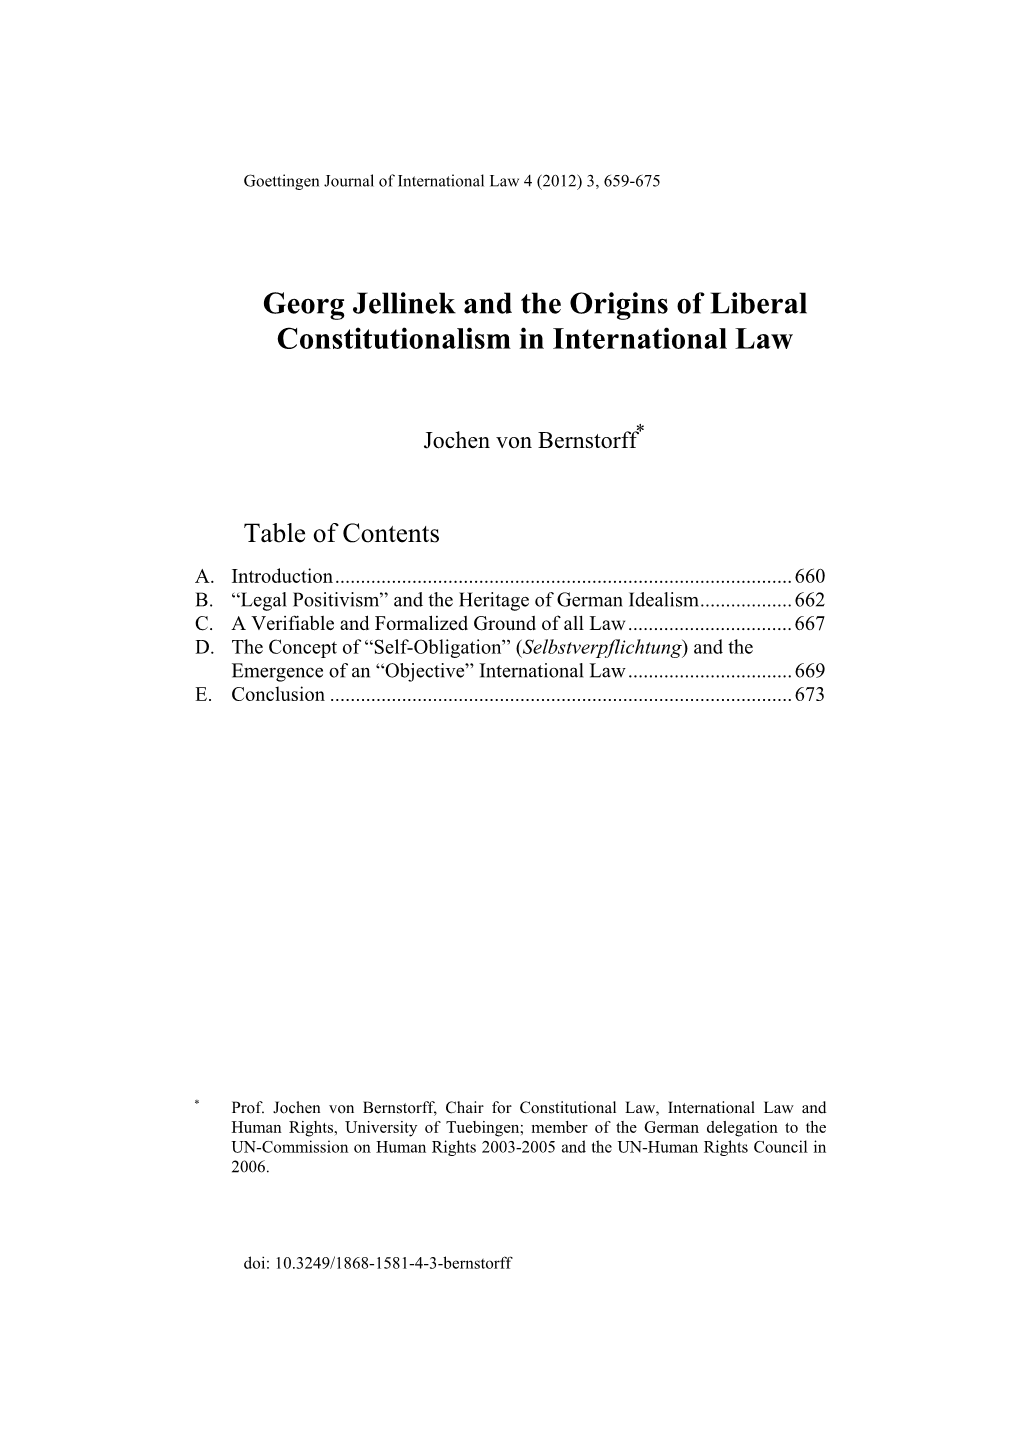 Georg Jellinek and the Origins of Liberal Constitutionalism in International Law